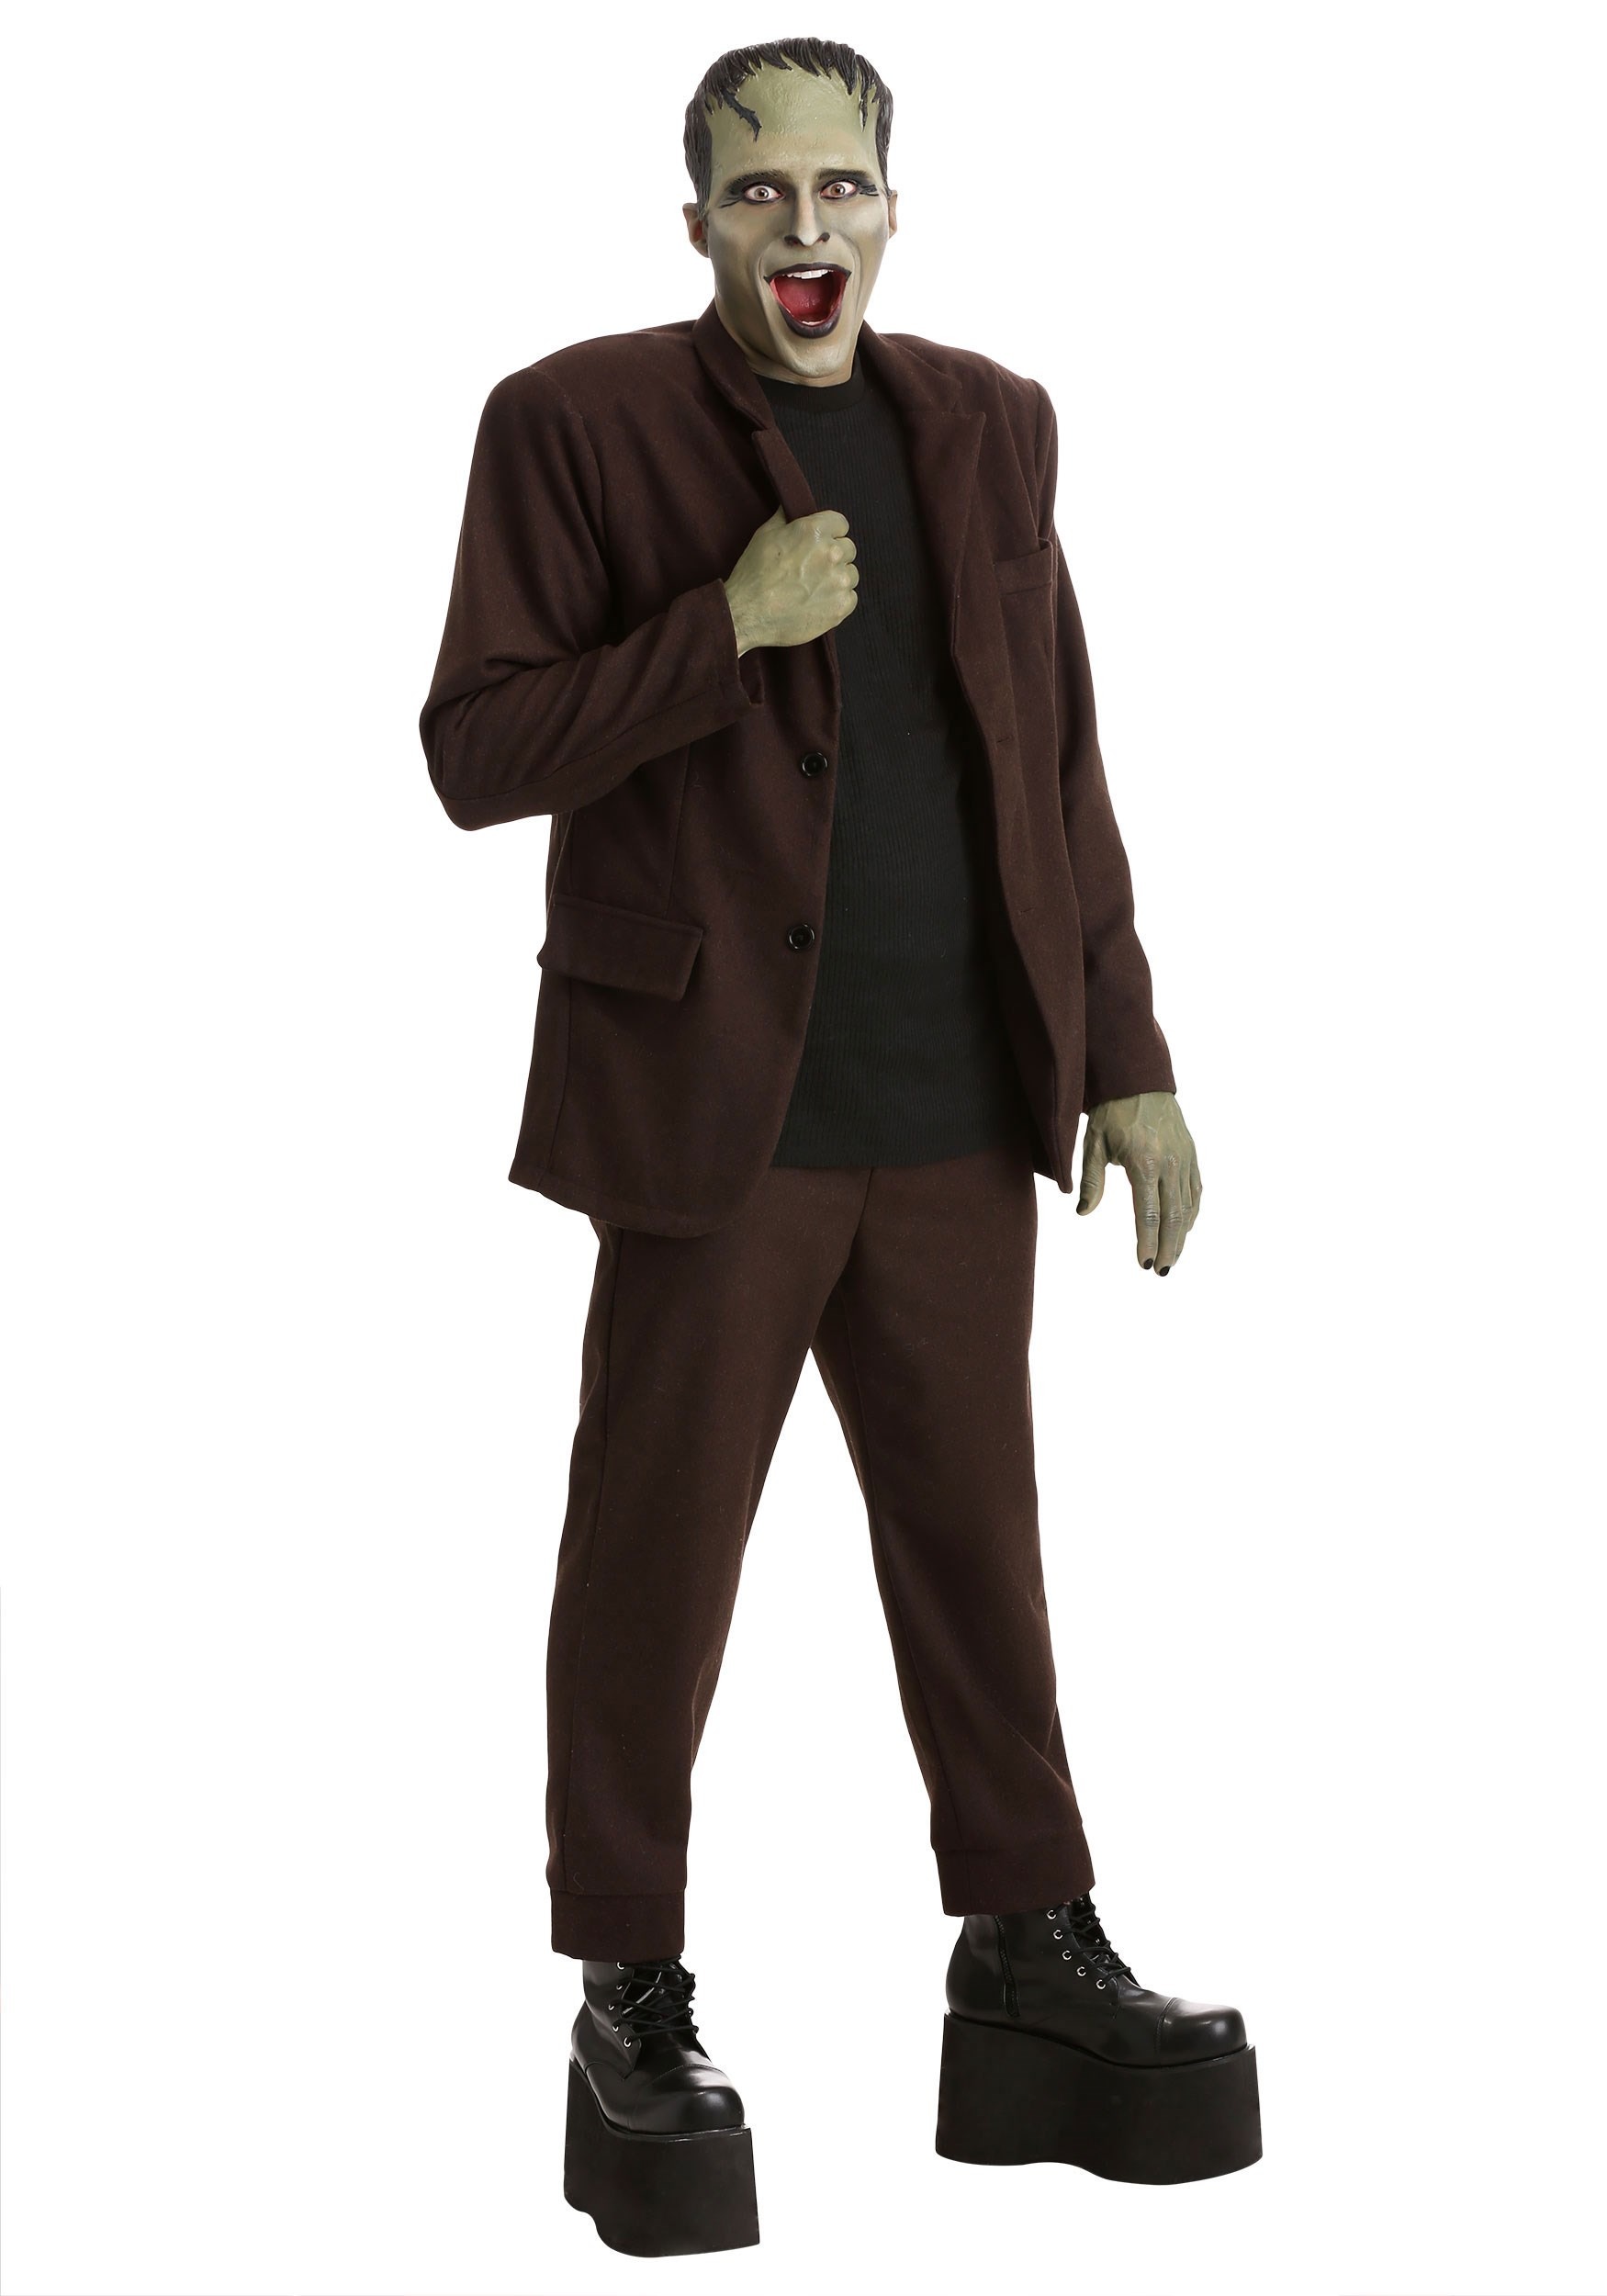 Herman Munster Plus Size The Munsters Costume